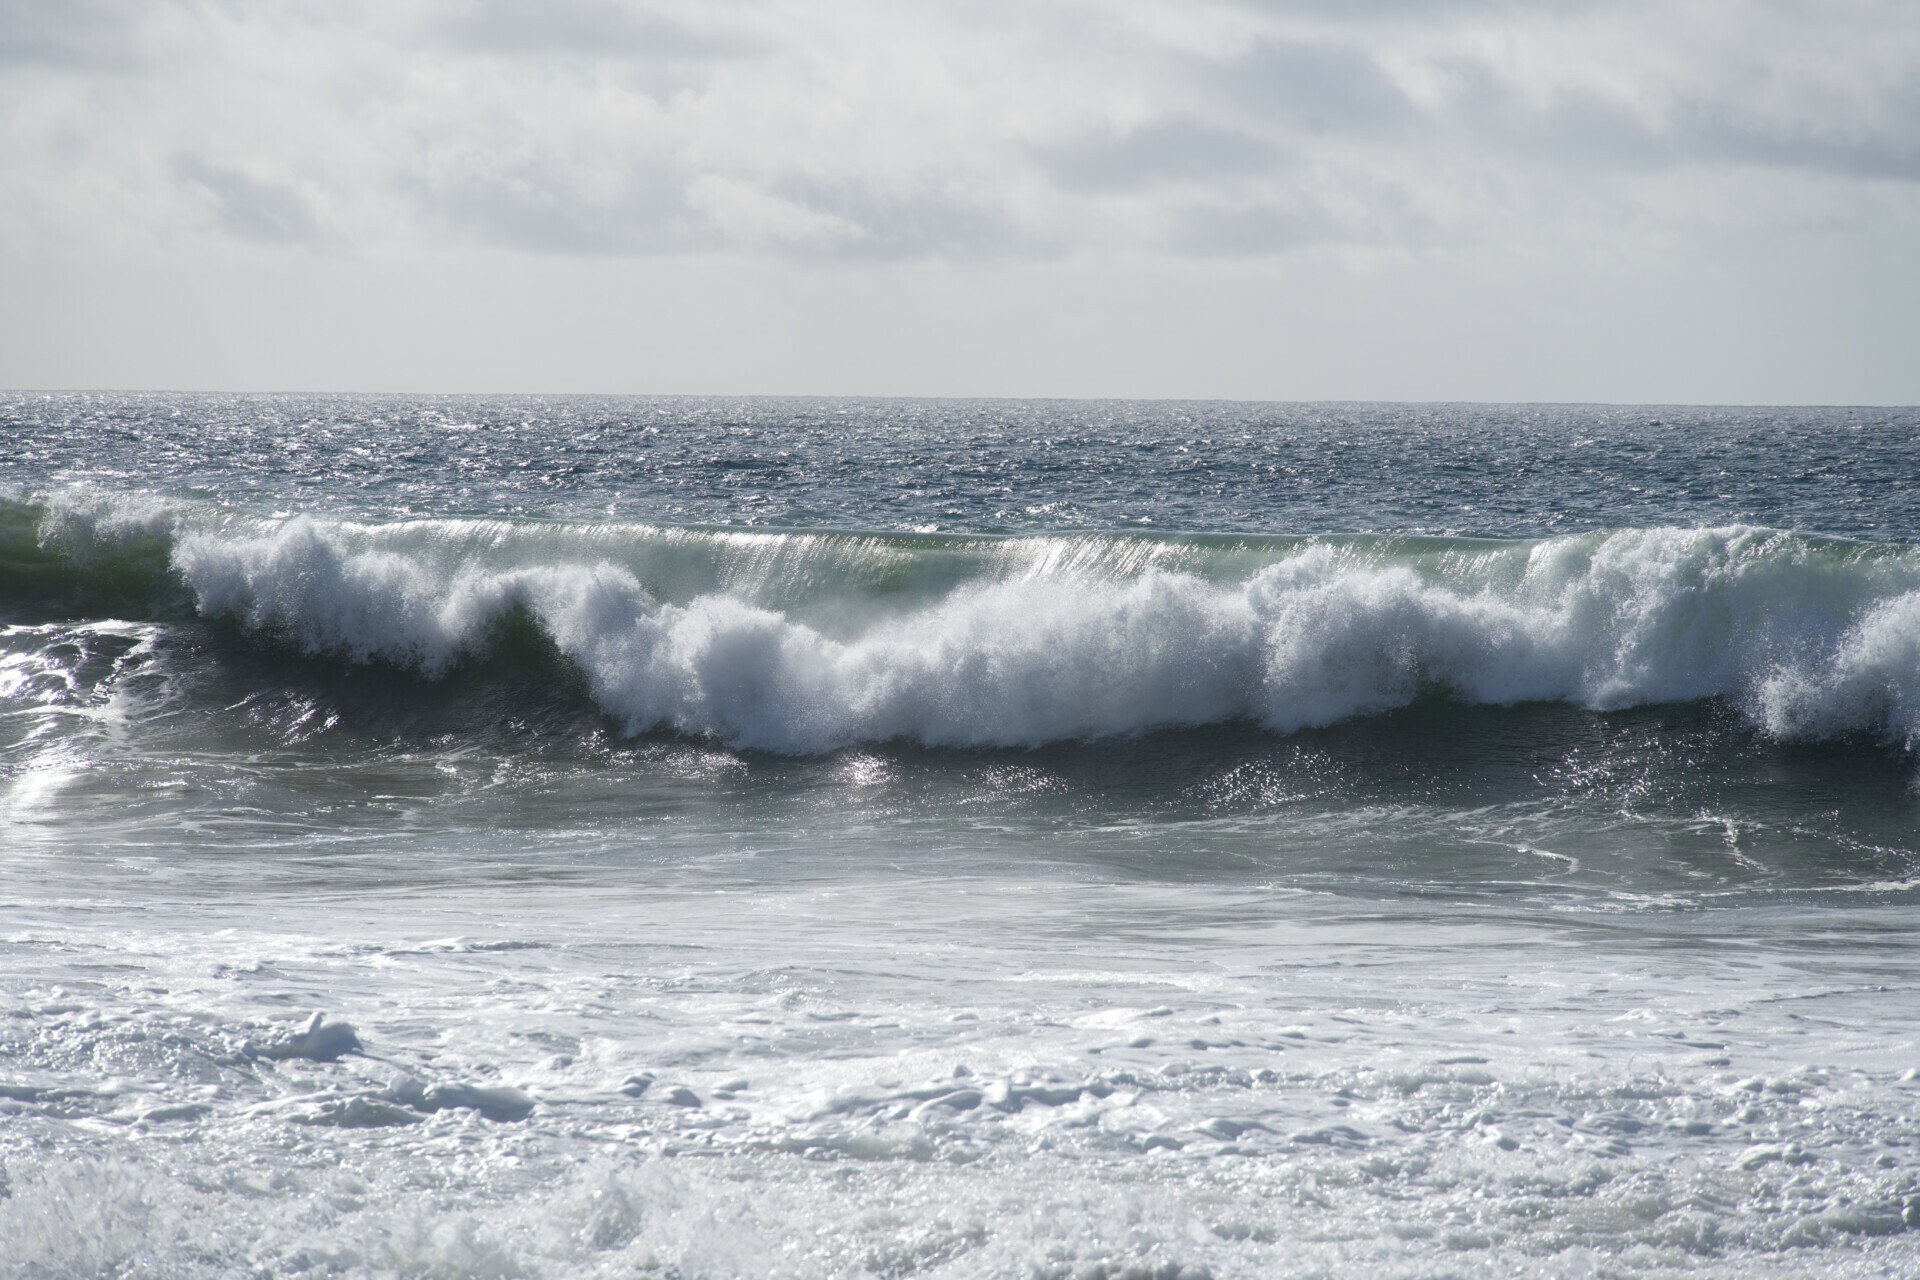 A powerful wave cresting at Zuma Beach, Malibu, with the glistening Pacific Ocean in the backdrop.